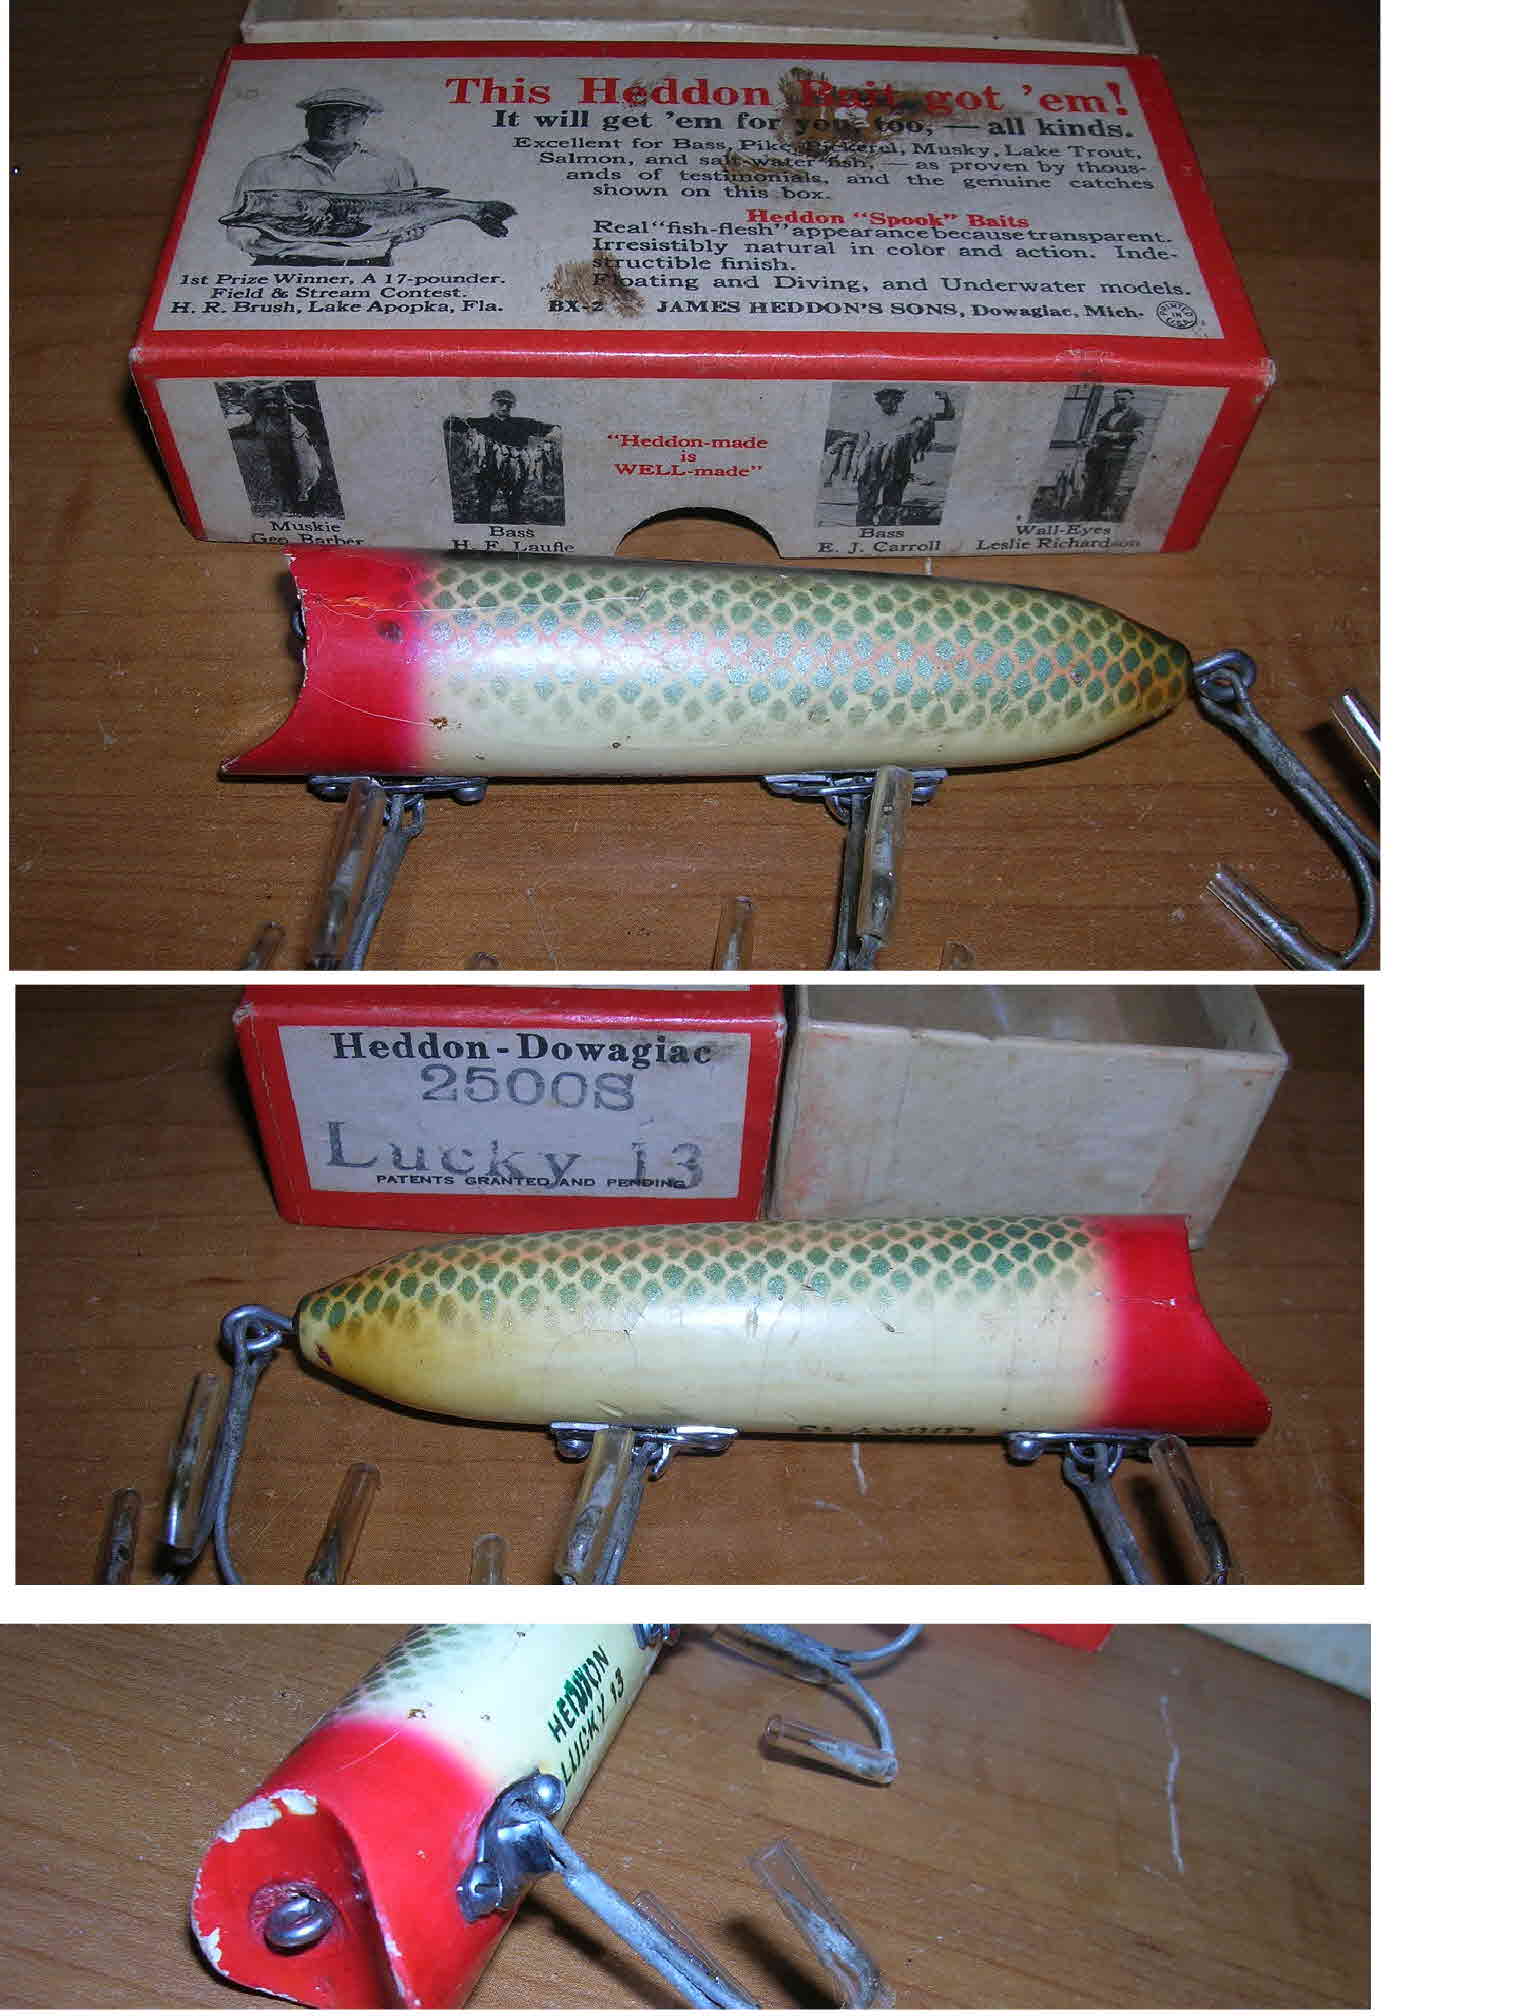 LOT OF 2 HEDDON BABY LUCKY 13 WOODEN FISHING LURE USED TACKLE BOX FIND